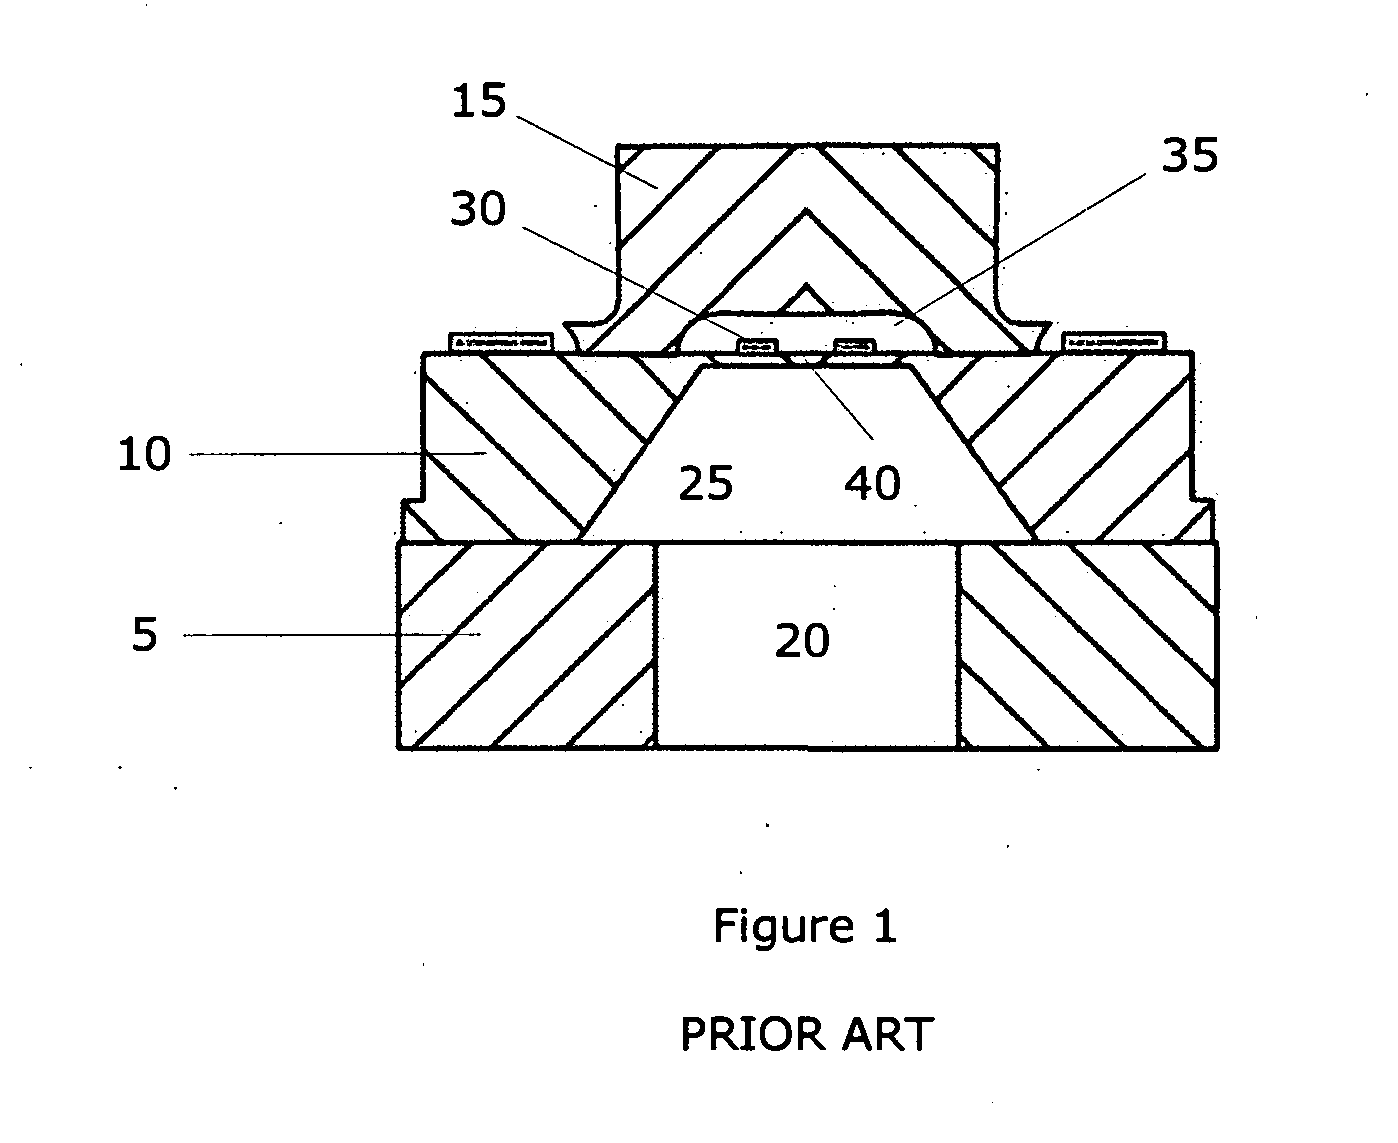 Apparatus and method for minimizing drift of a piezo-resistive pressure sensors due to progressive release of mechanical stress over time